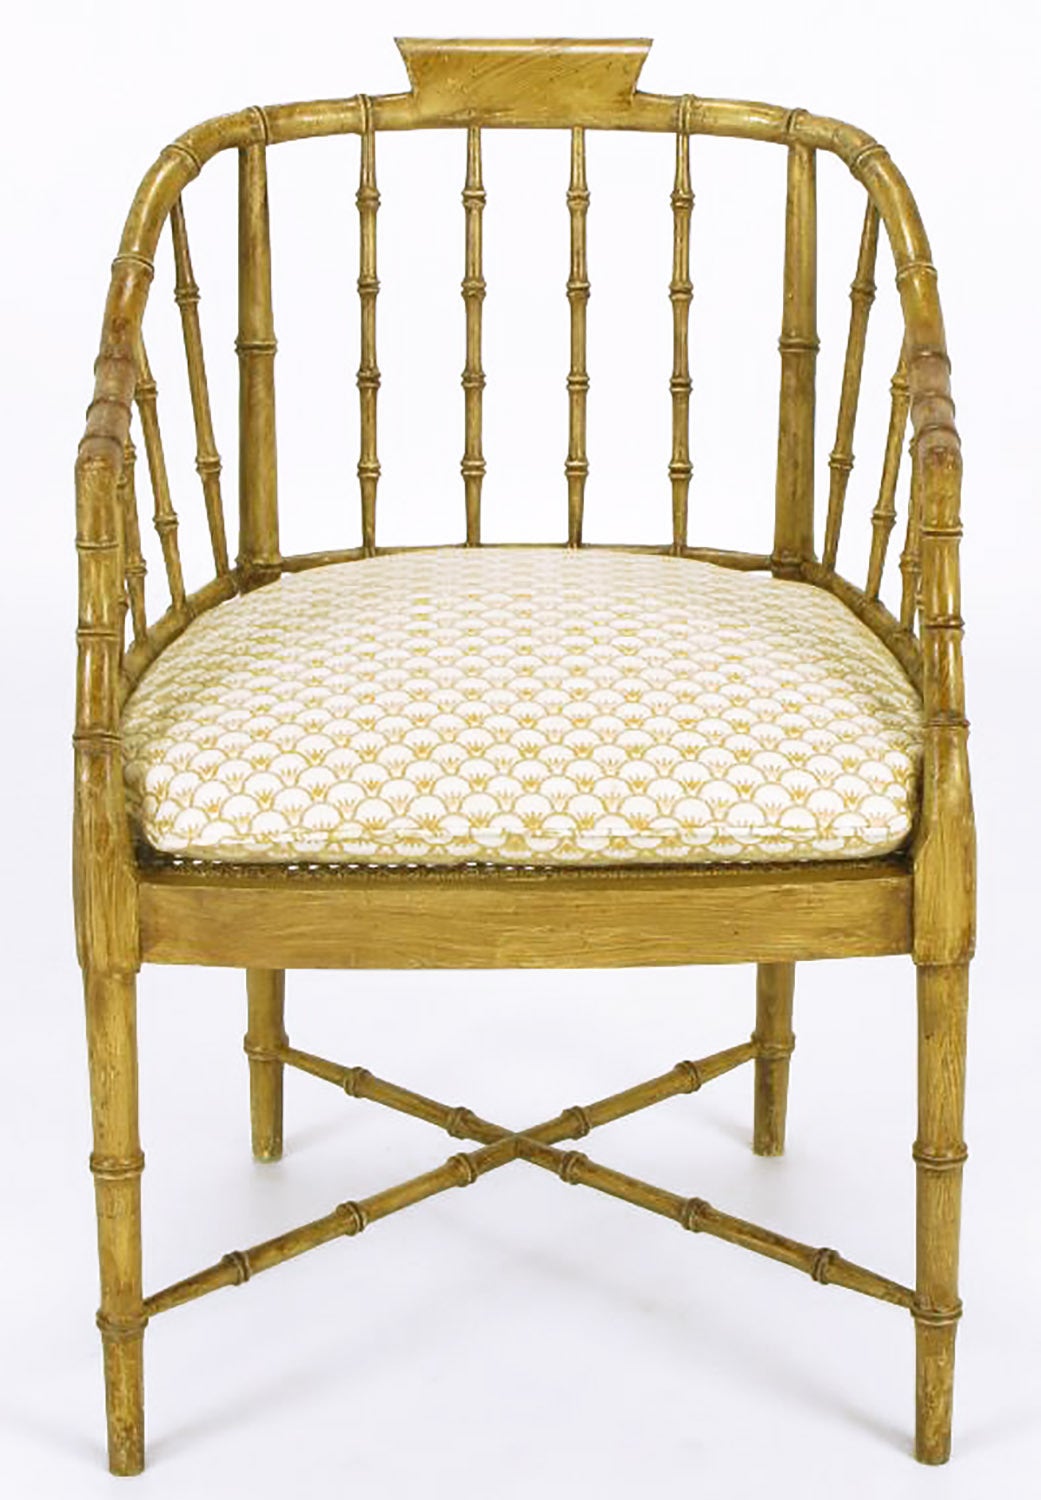 Pair of Baker Glazed Lacquer Bamboo-Form Armchairs In Good Condition For Sale In Chicago, IL